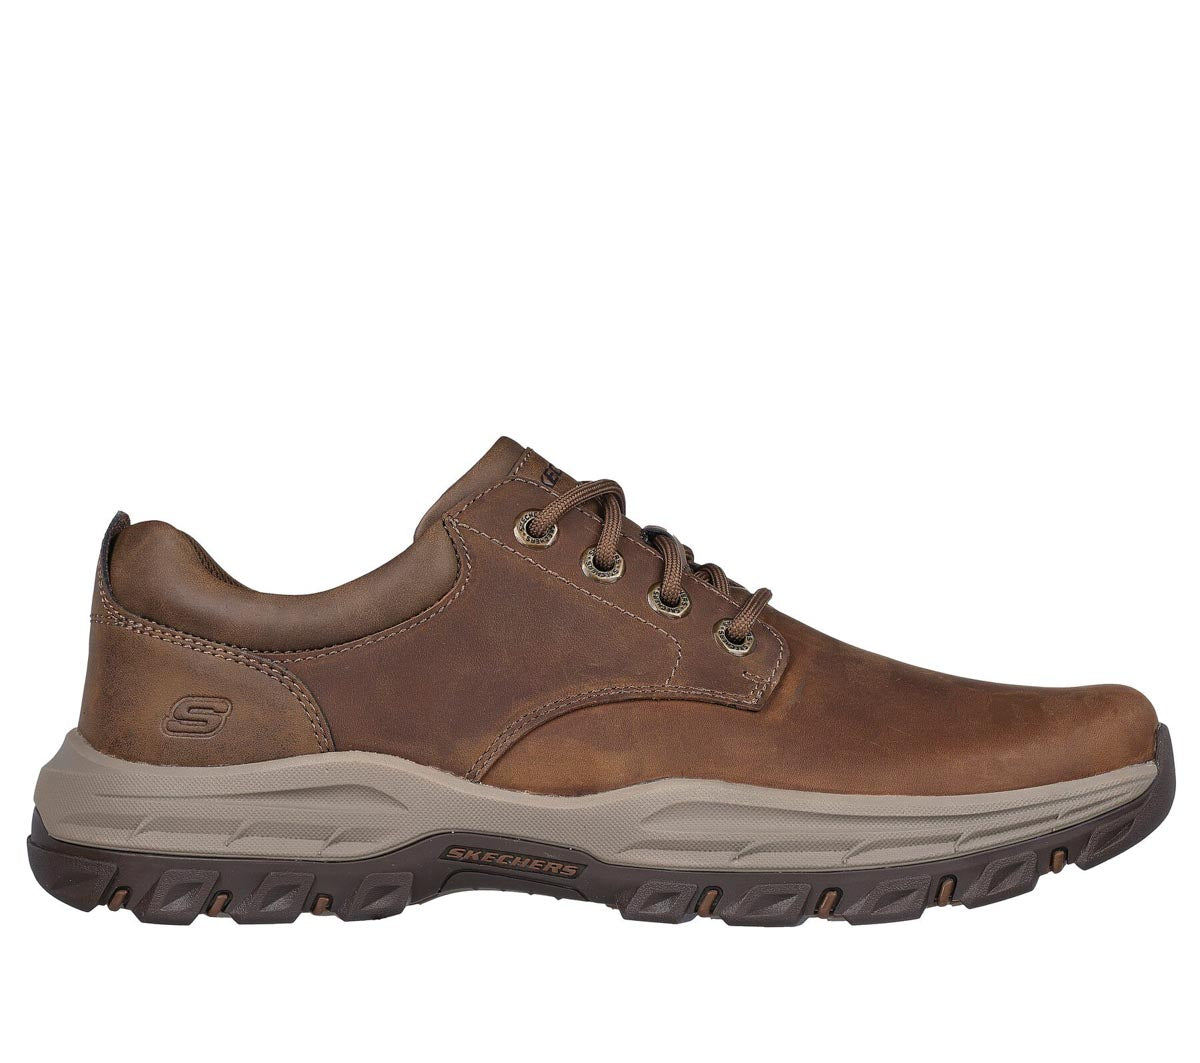 Close-up of the Air-Cooled Memory Foam insole in Skechers brown leather shoes.